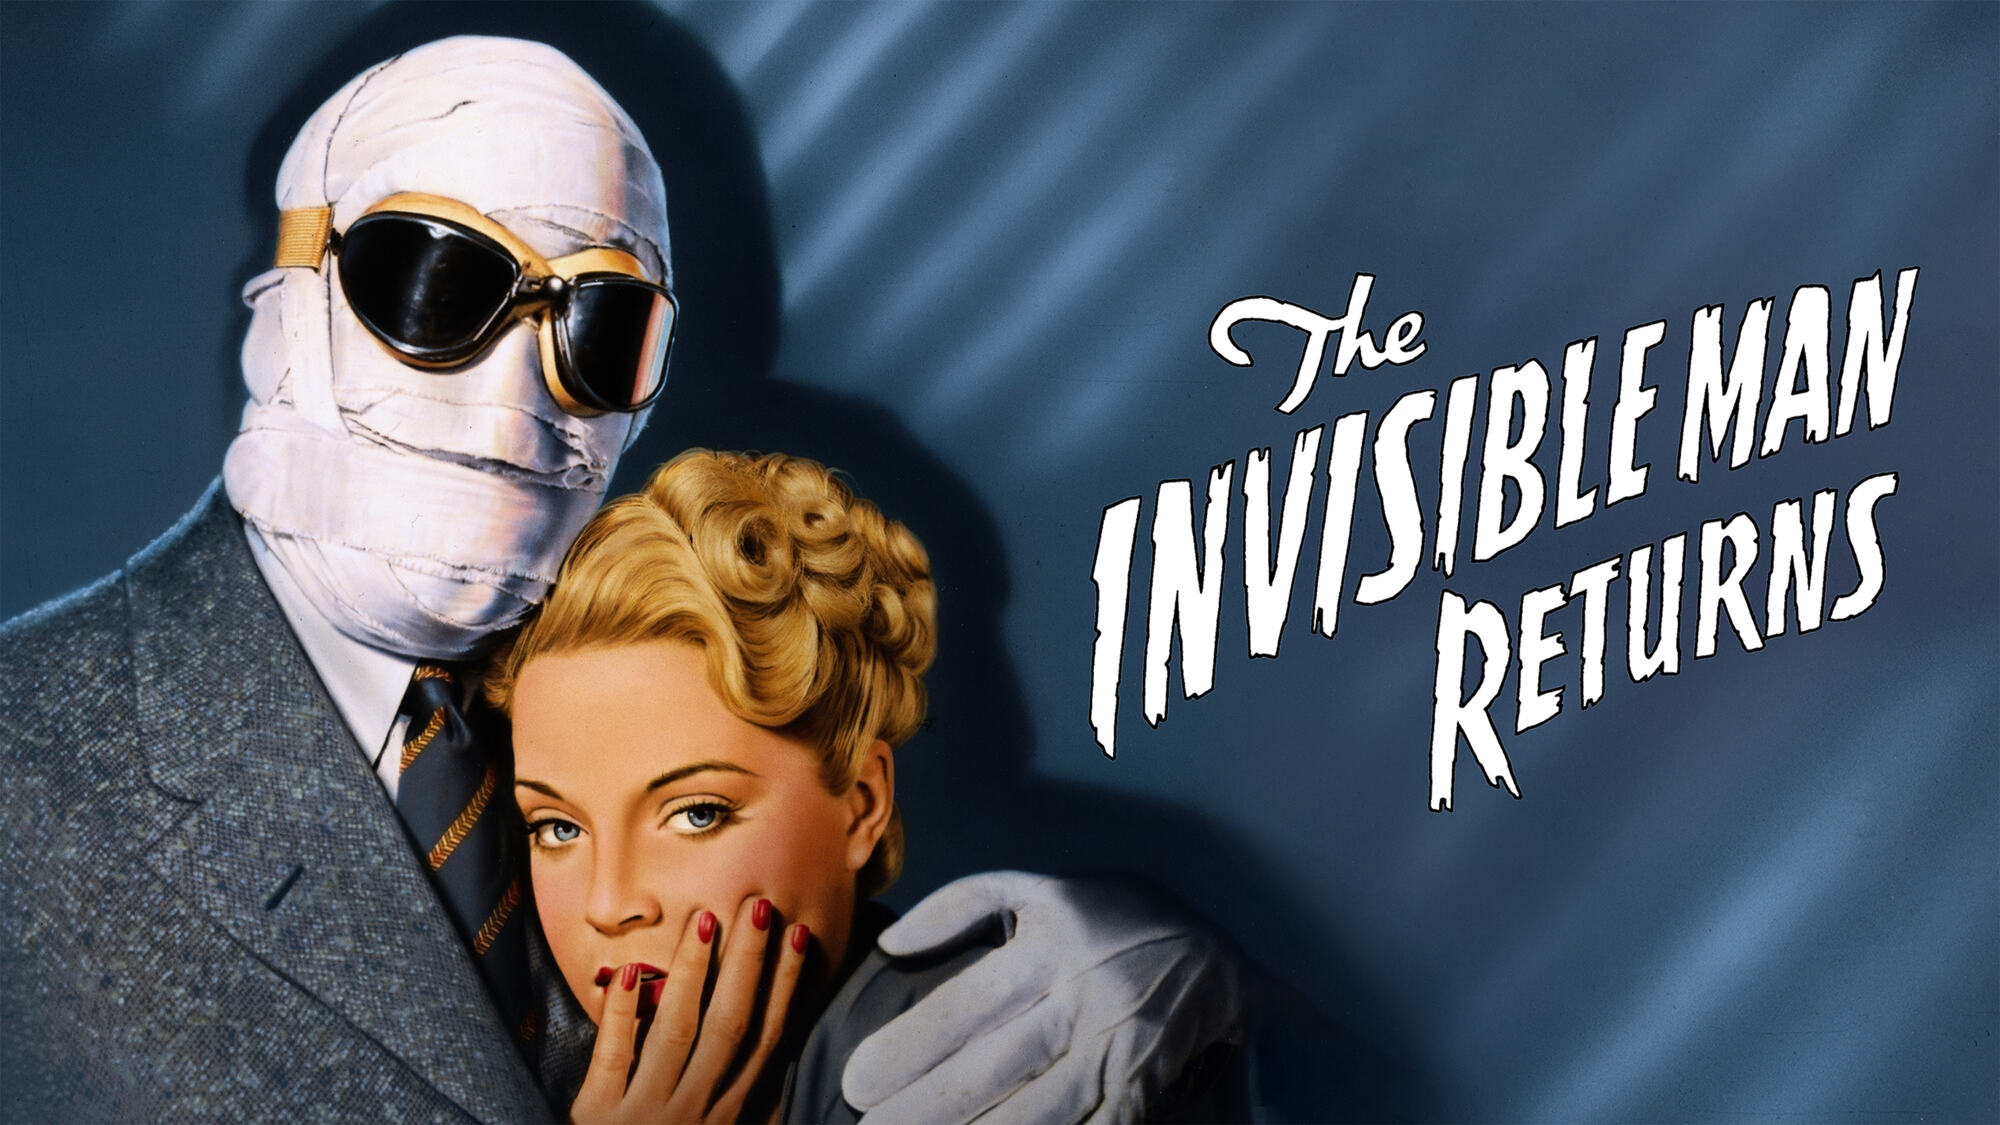 38-facts-about-the-movie-the-invisible-man-returns